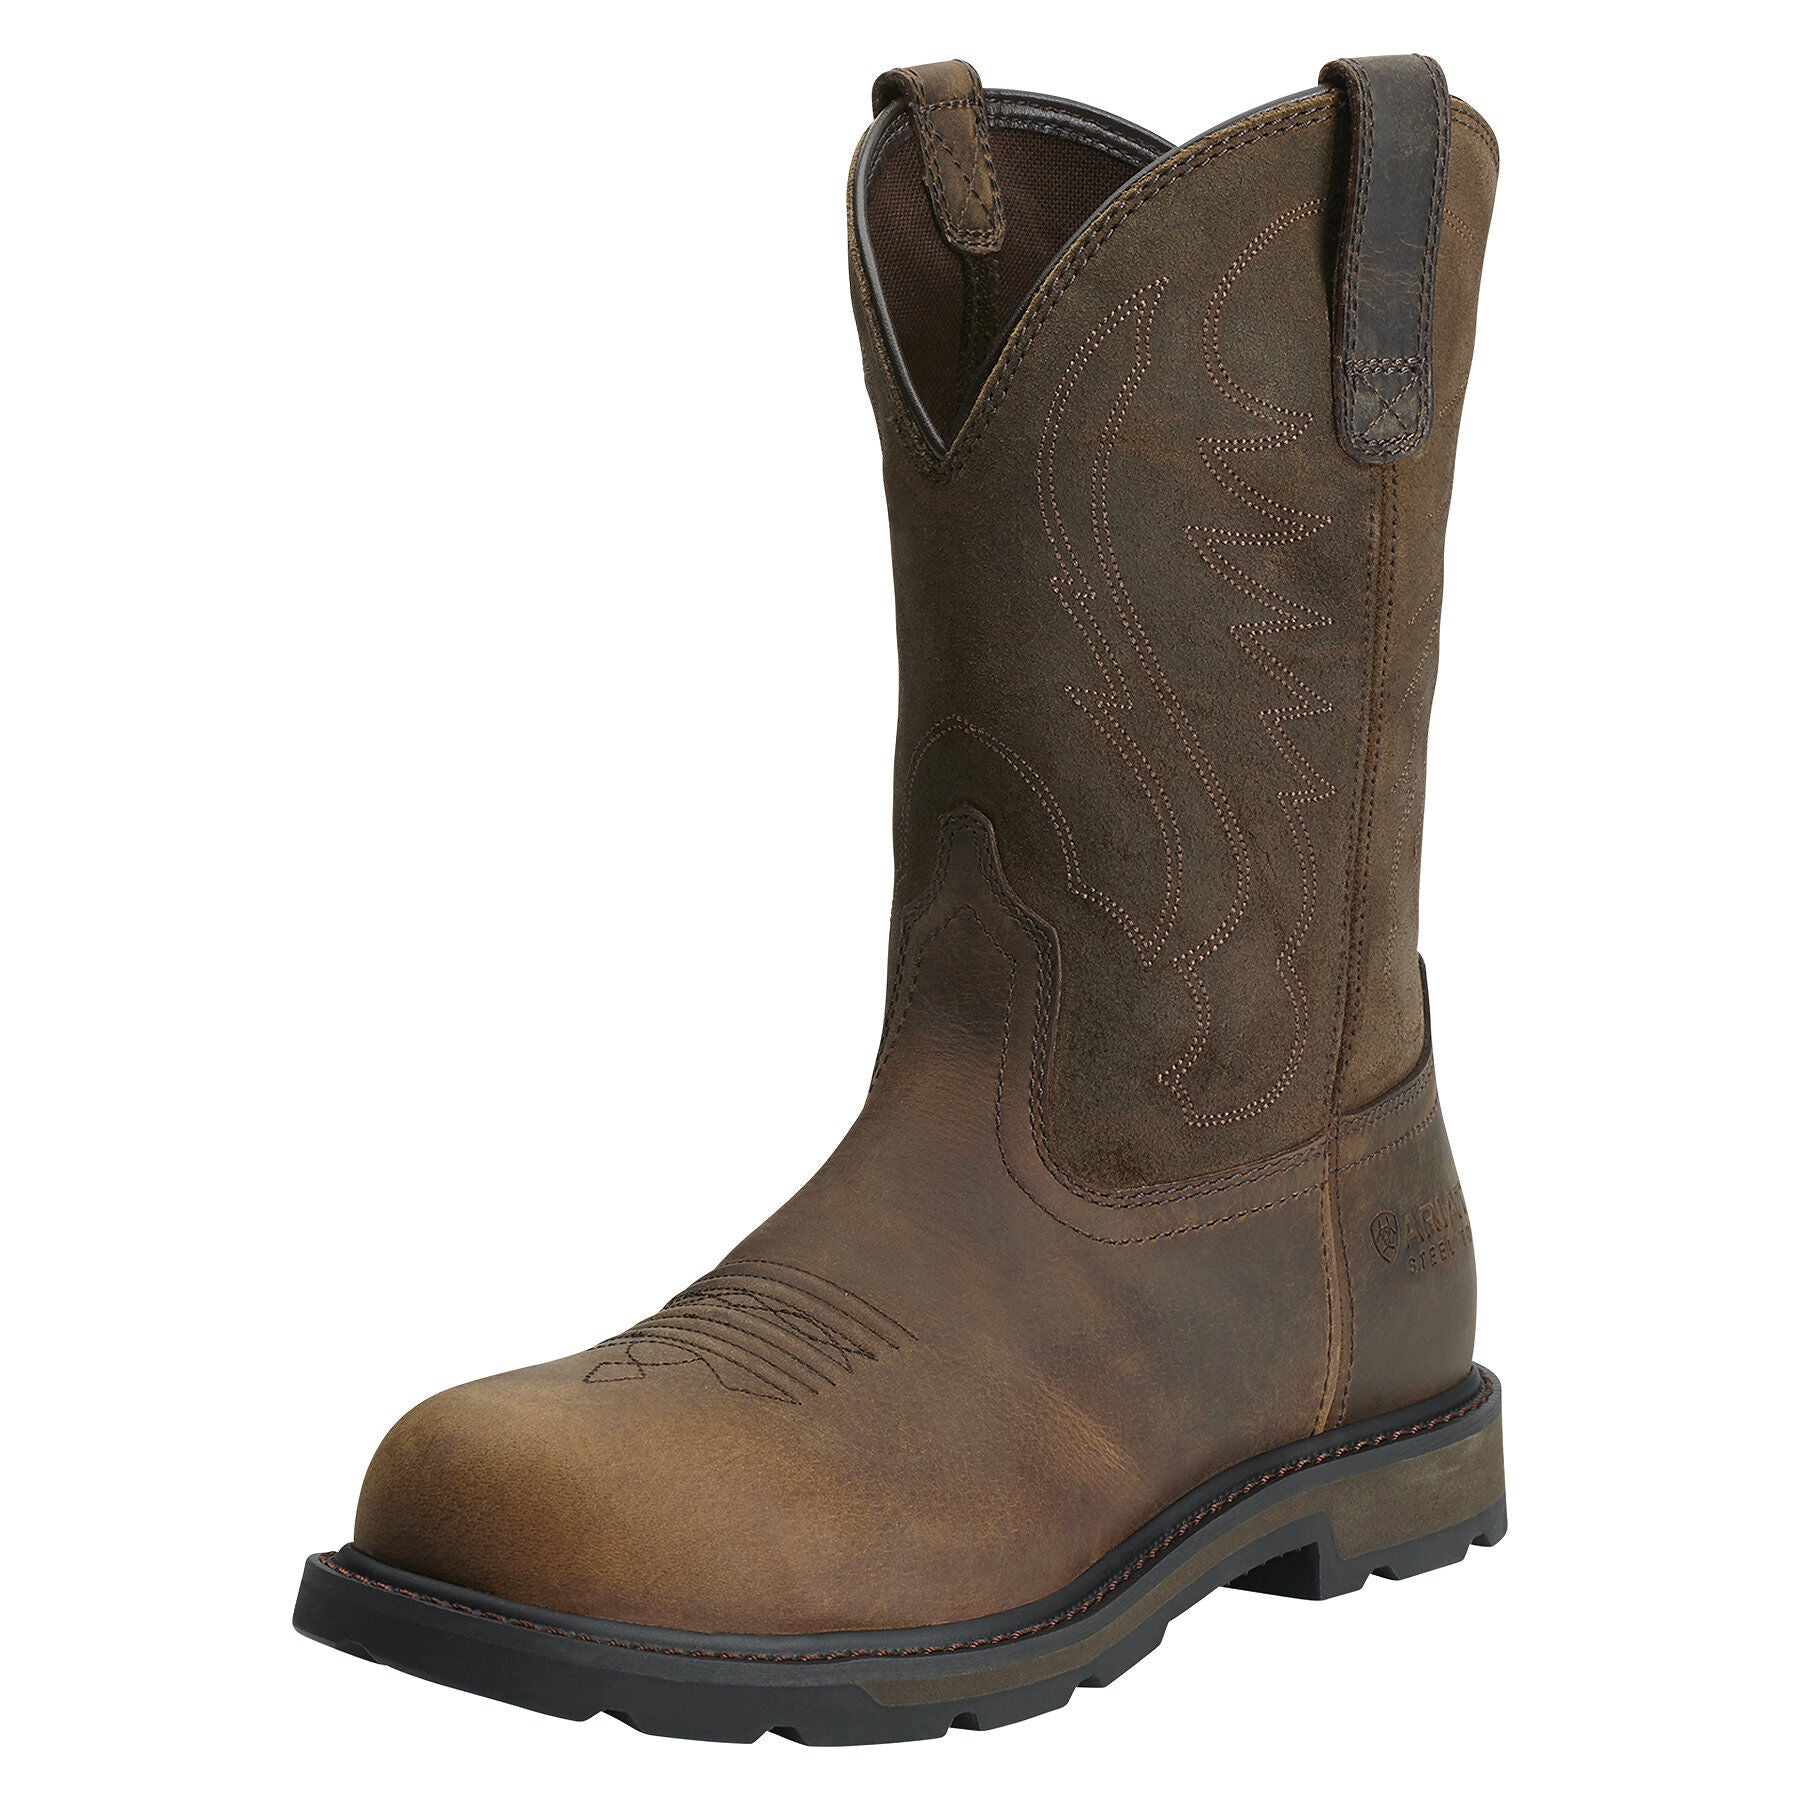 Ariat Men's Groundbreaker Pull-on Steel Toe Boot - Brown - French's Boots